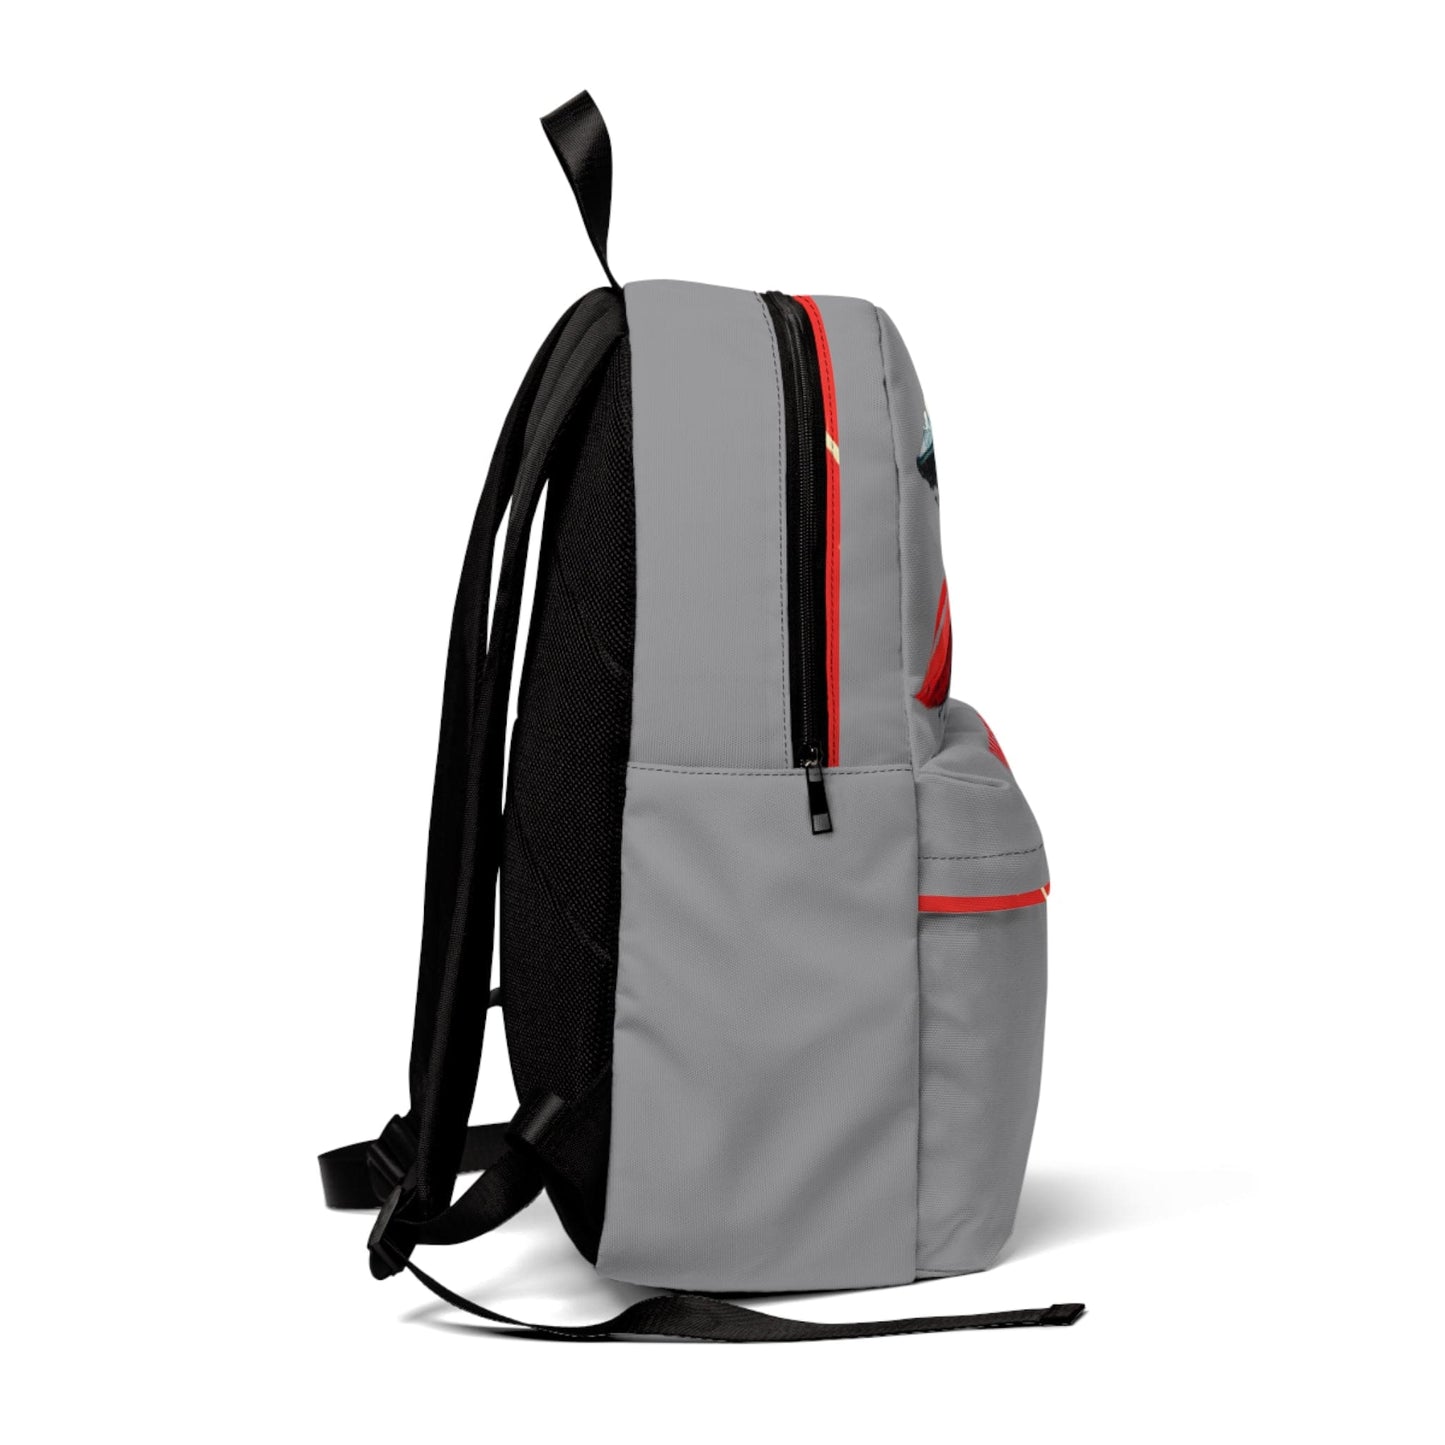 IDMENTO SpaceBound backpack [Moon gray]